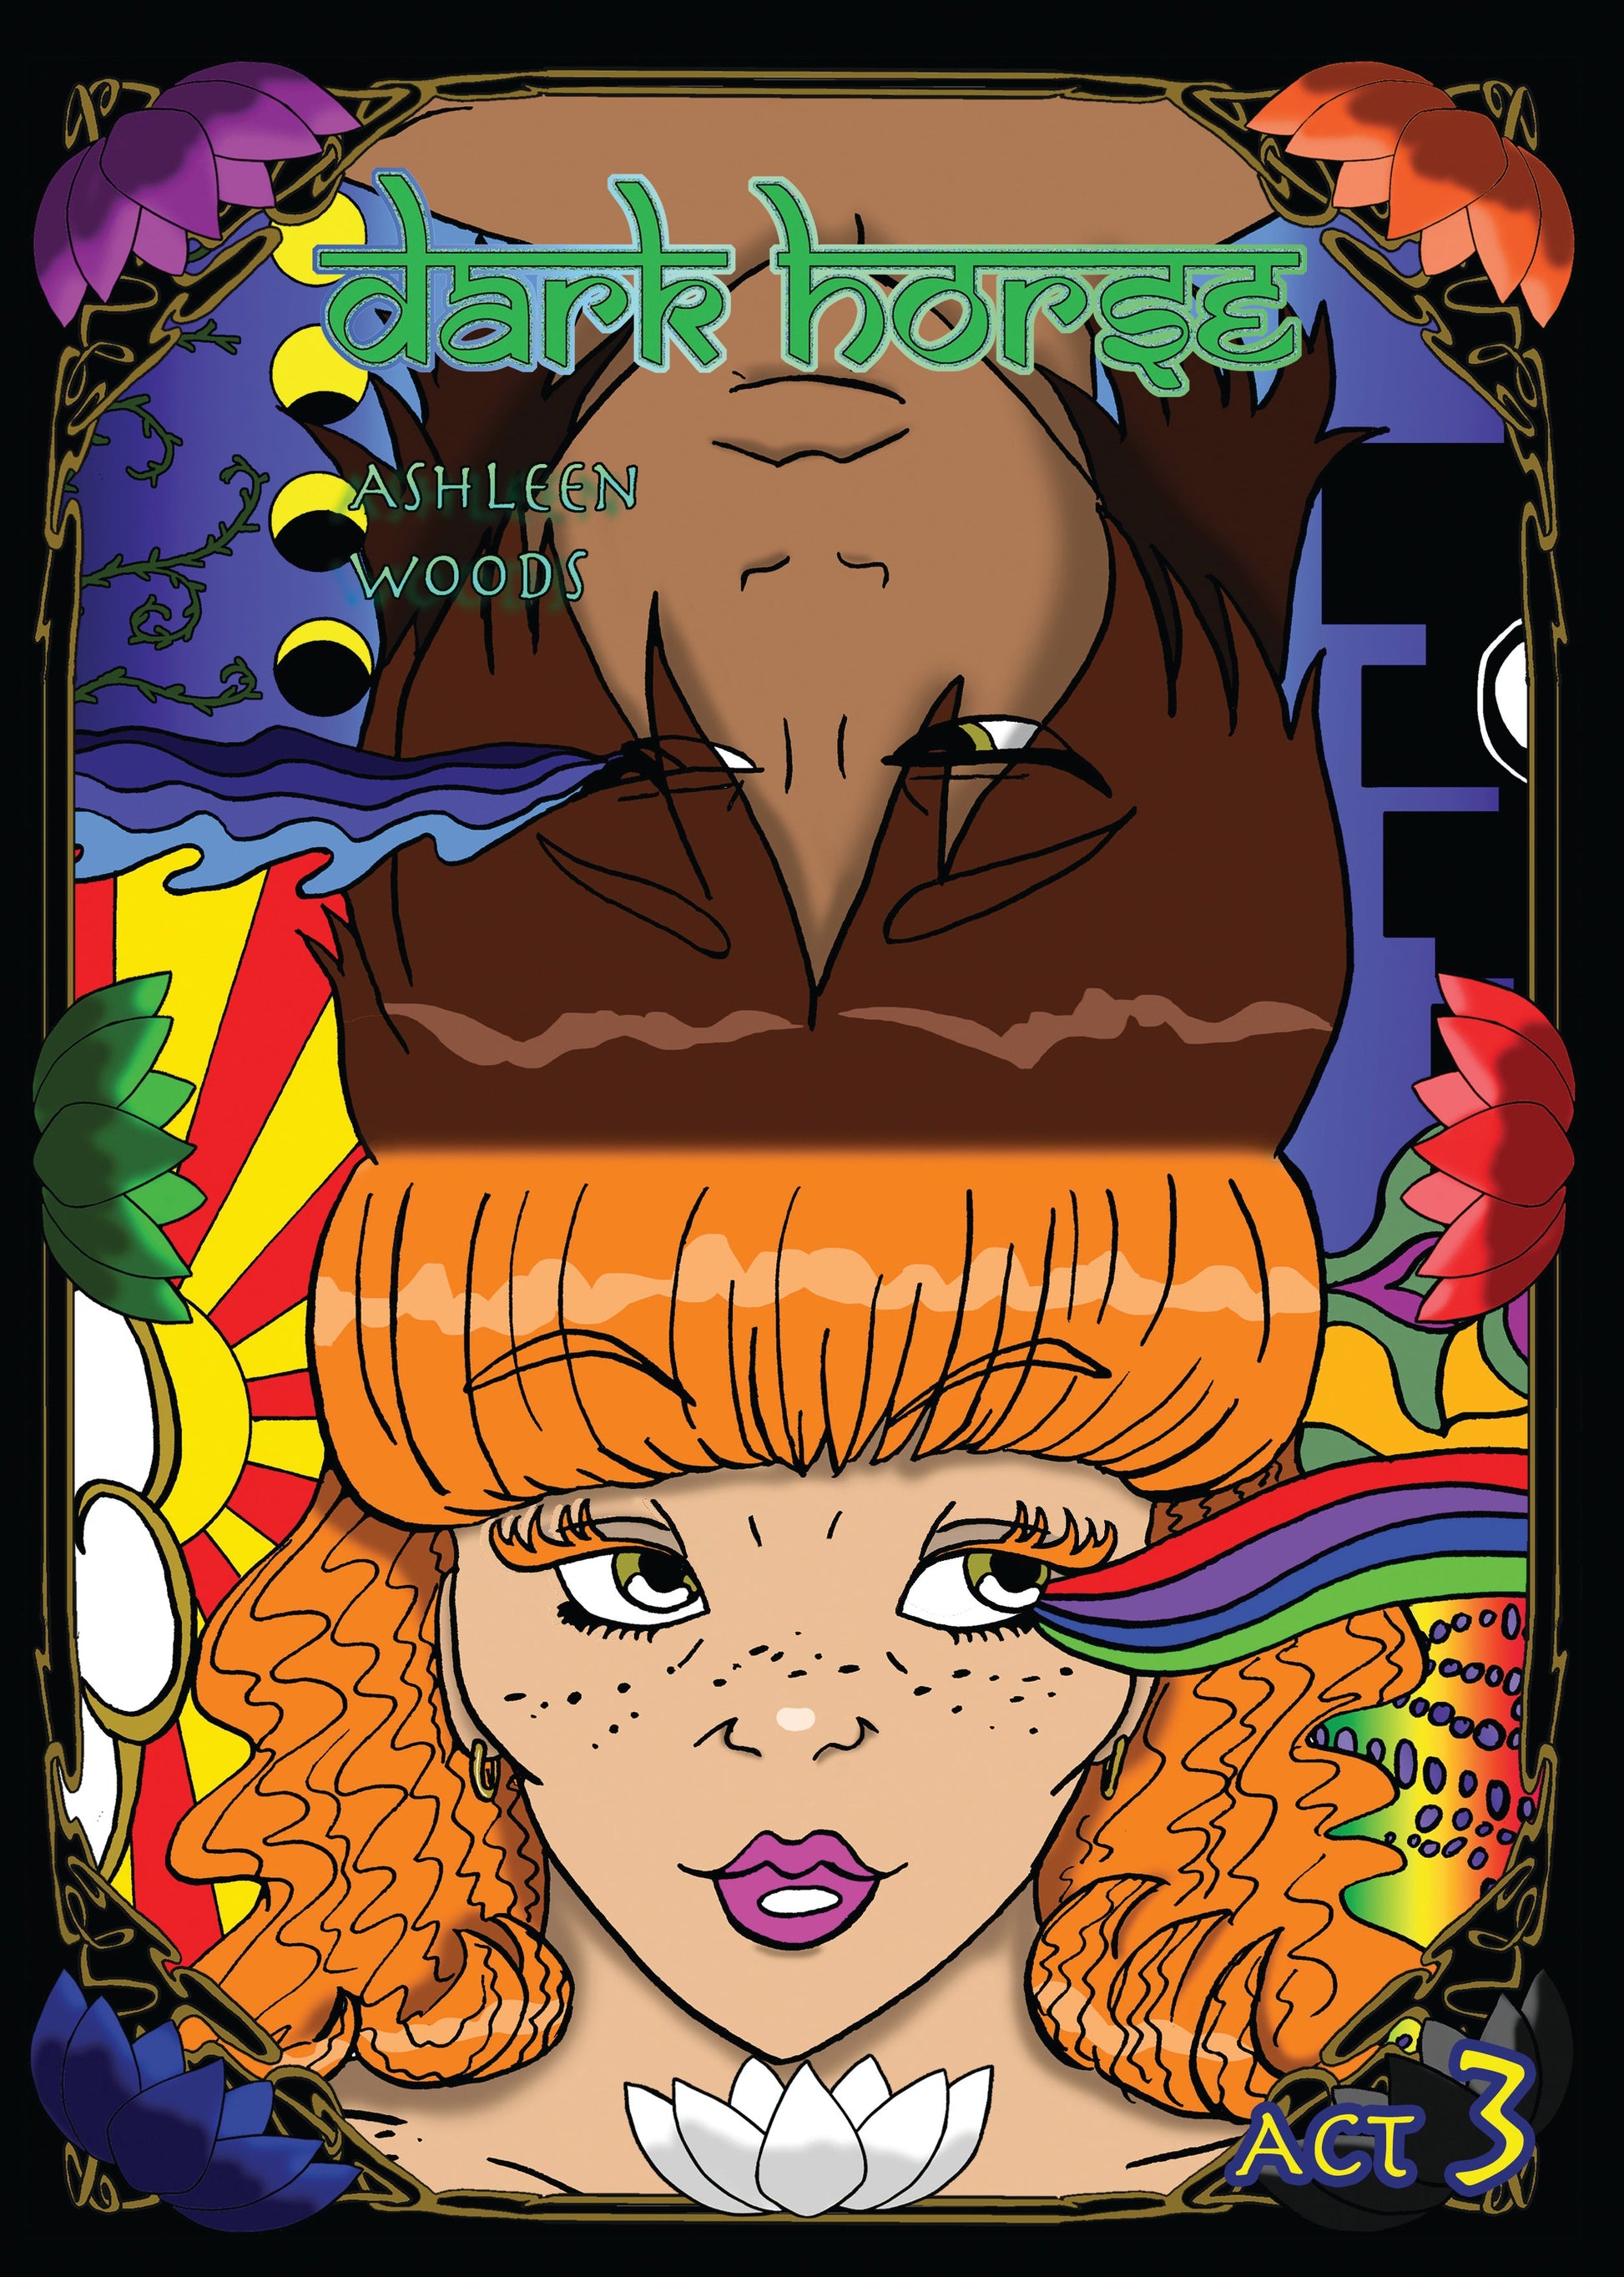 Cover to act three. Features two characters who are in a split screen. The top dark-skinned person has symbolism related to the moon along with blue colors, and looks worried or resigned. On the other side is a freckled woman who looks happier in comparison, smiling as rainbows and symbolism related to the sun adorn her background and side.